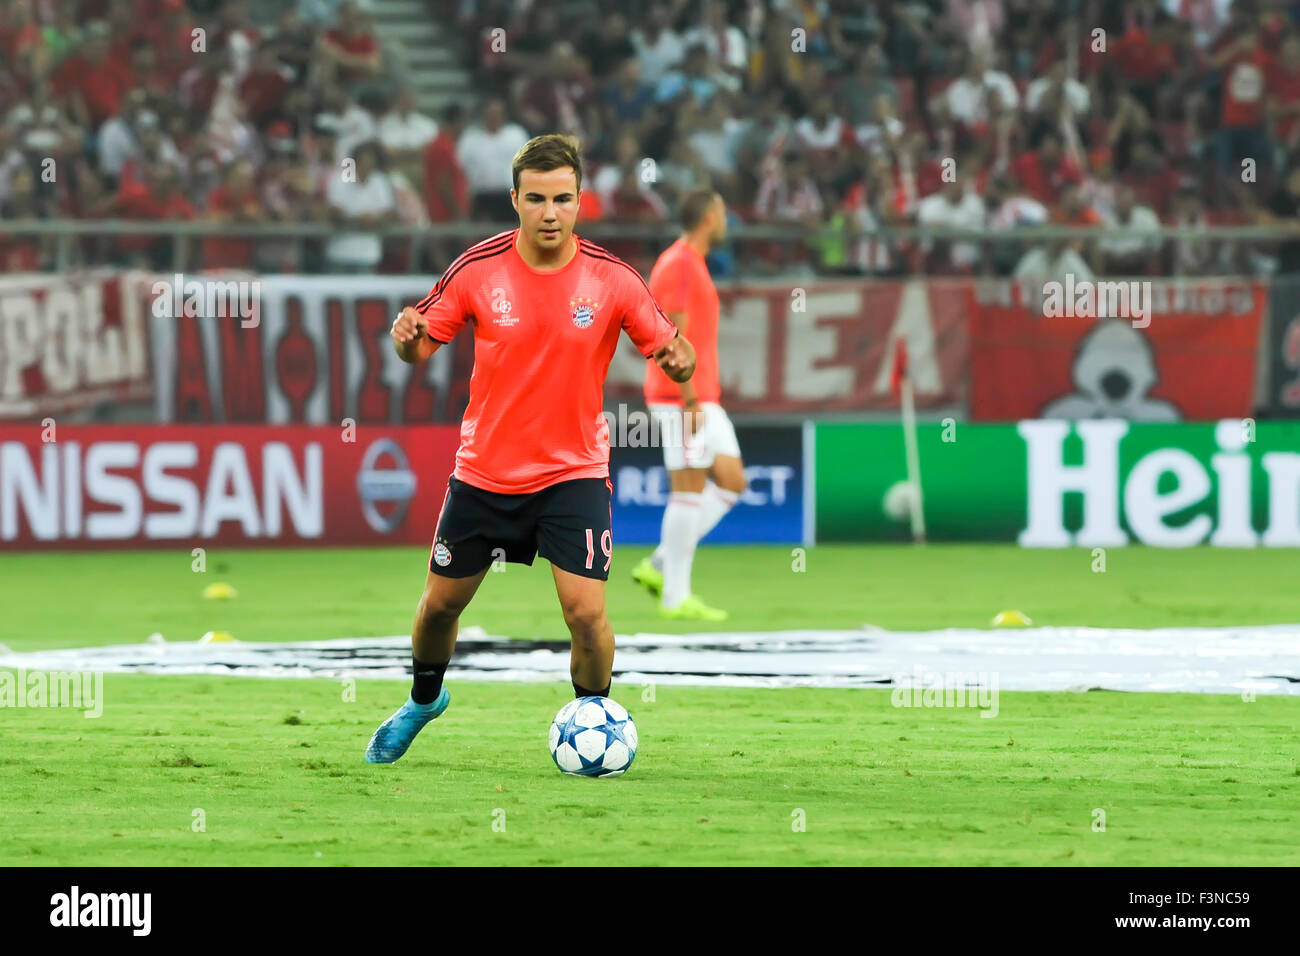 Athens, Greece- September 16, 2015: Mario Gotze before the beginning of the UEFA Champions League game between Olympiacos and Ba Stock Photo